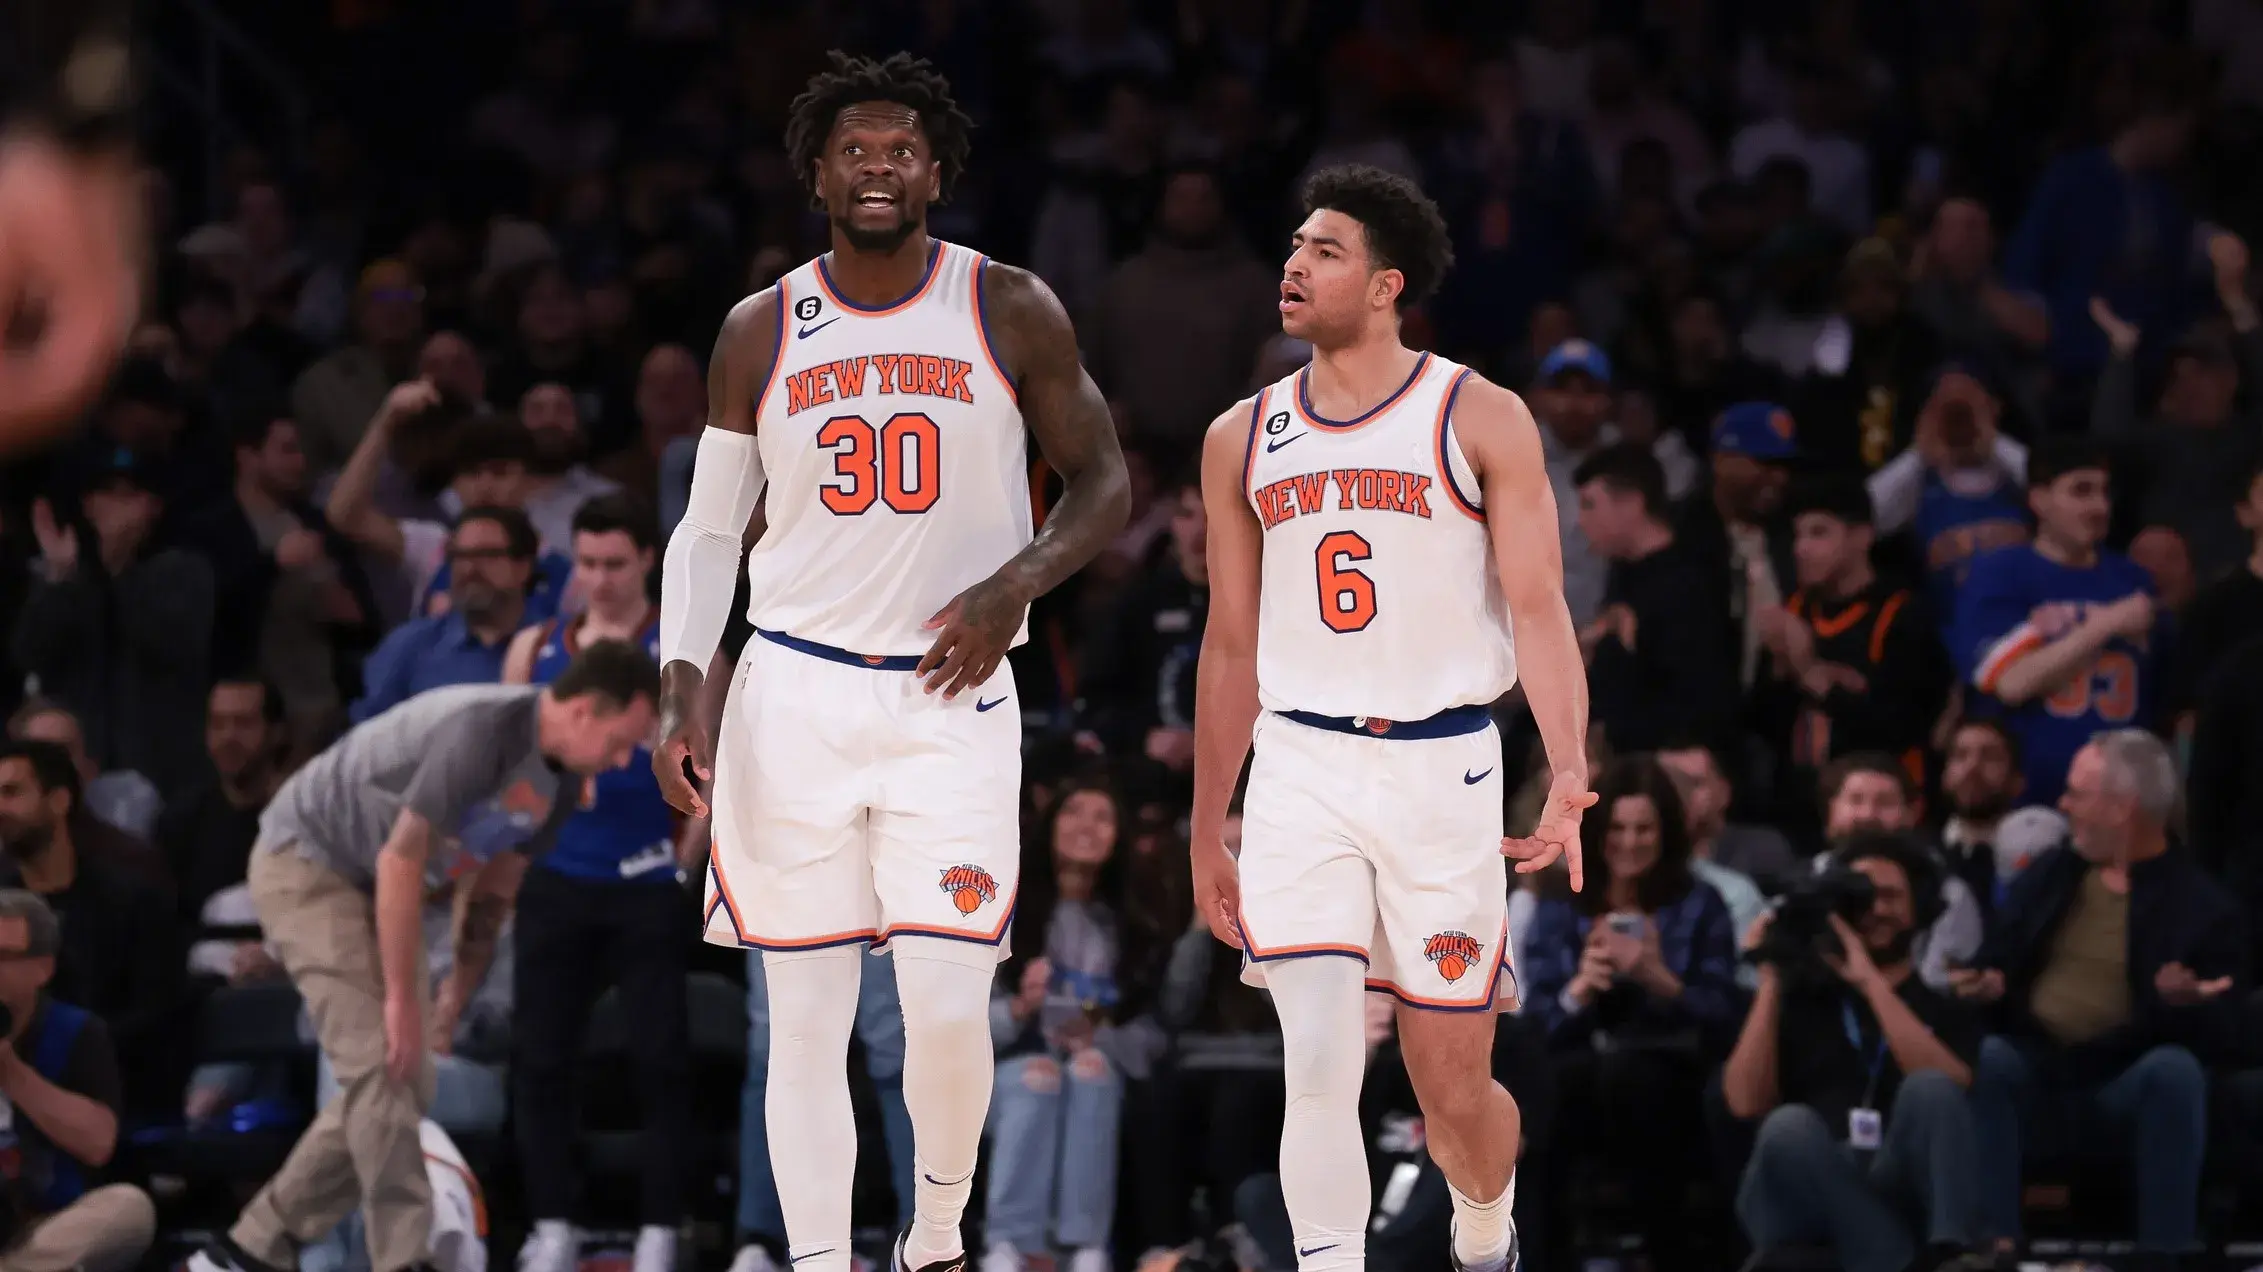 Mar 7, 2023; New York, New York, USA; New York Knicks forward Julius Randle (30) and guard Quentin Grimes (6) walk off the court after the first half against the Charlotte Hornets at Madison Square Garden. / Vincent Carchietta-USA TODAY Sports